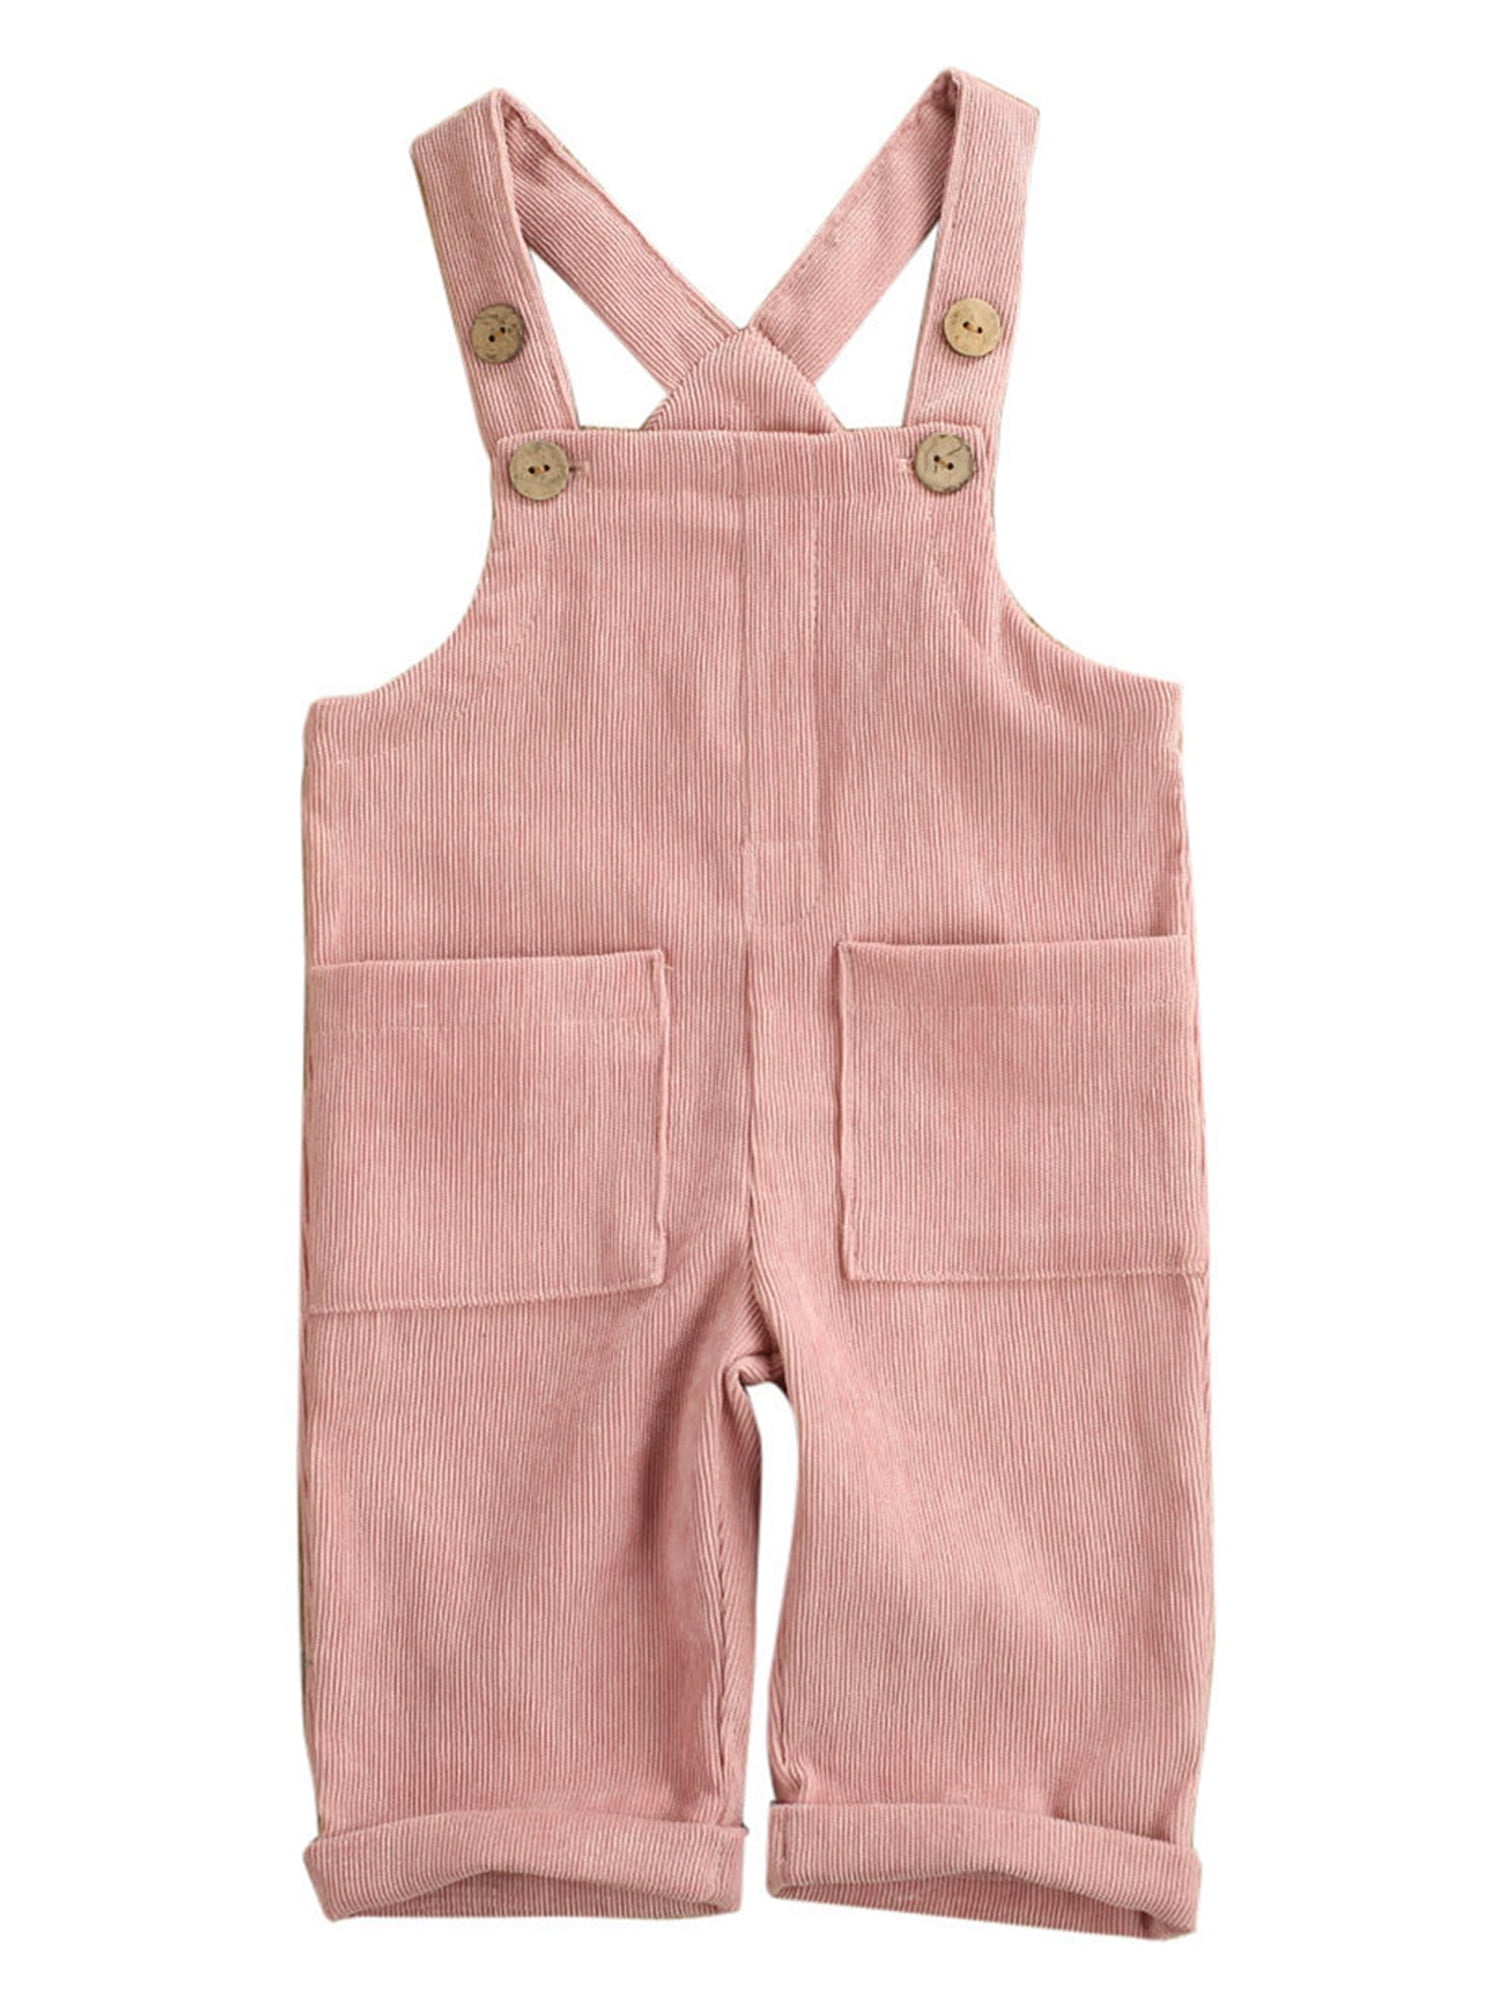 discount 75% Zara dungaree KIDS FASHION Baby Jumpsuits & Dungarees Corduroy Brown 4Y 